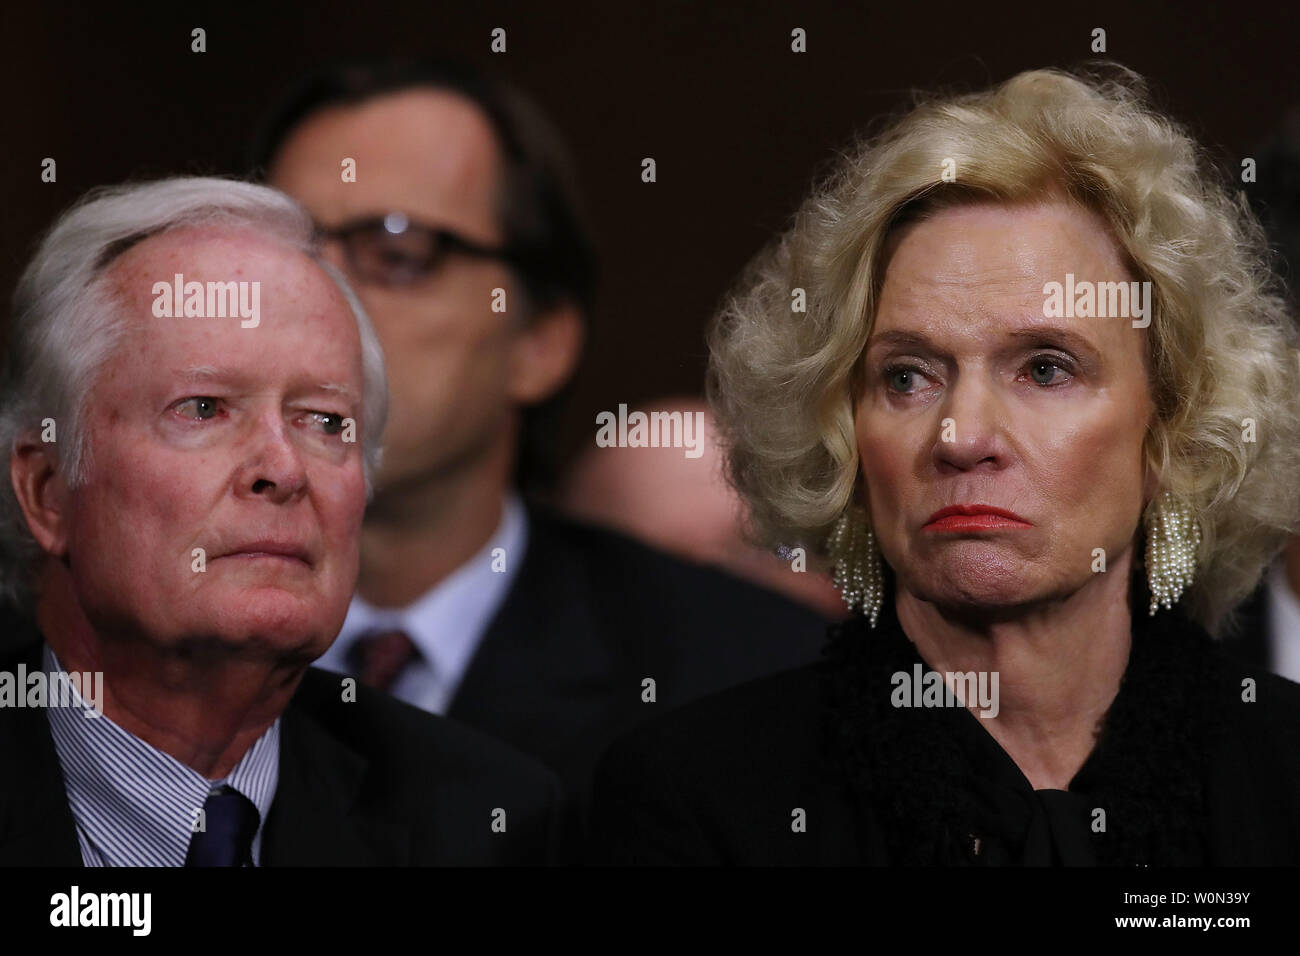 Judge Brett Kavanaugh's parents, Everett and Martha Kavanaugh, listen to their son testify before the Senate Judiciary Committee during his Supreme Court confirmation hearing in the Dirksen Senate Office Building on Capitol Hill September 27, 2018 in Washington, DC. Kavanaugh was called back to testify about claims by Christine Blasey Ford, who has accused him of sexually assaulting her during a party in 1982 when they were high school students in suburban Maryland.     Photo by Win McNamee/UPI Stock Photo